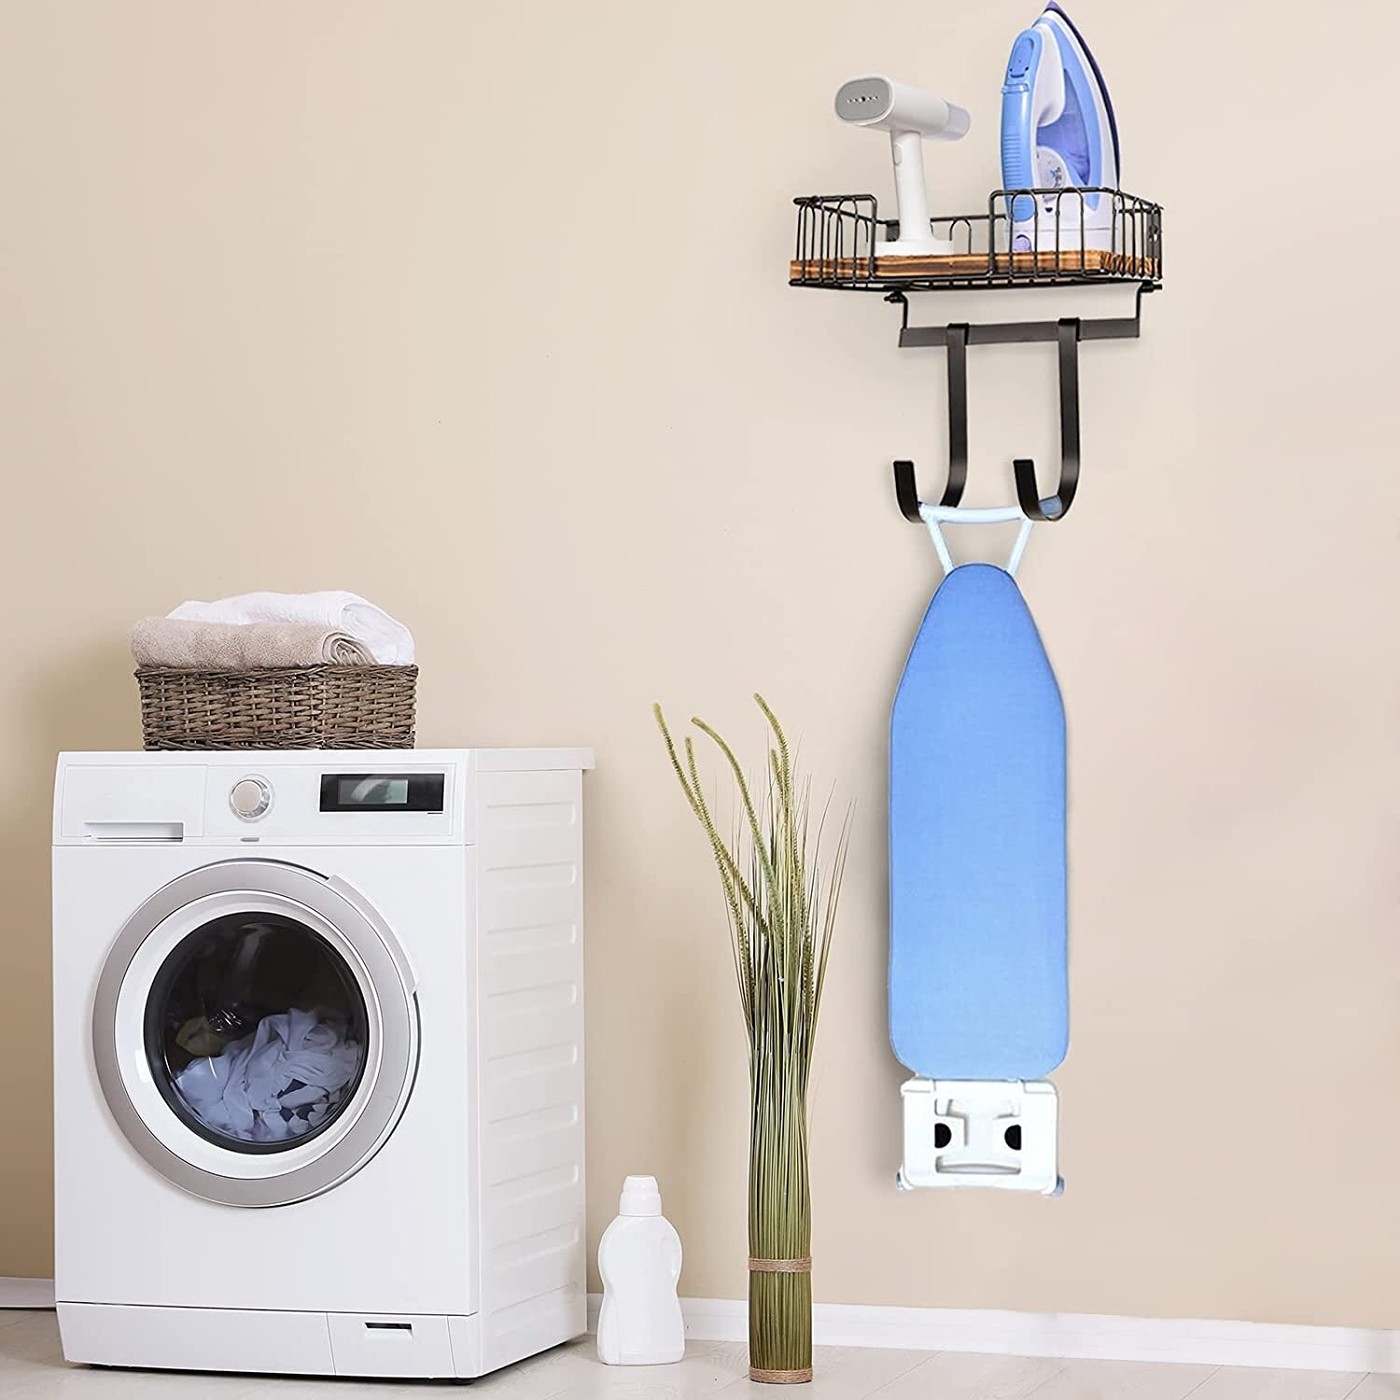 15 Useful Wooden Shelves For A Laundry Room - VisualHunt